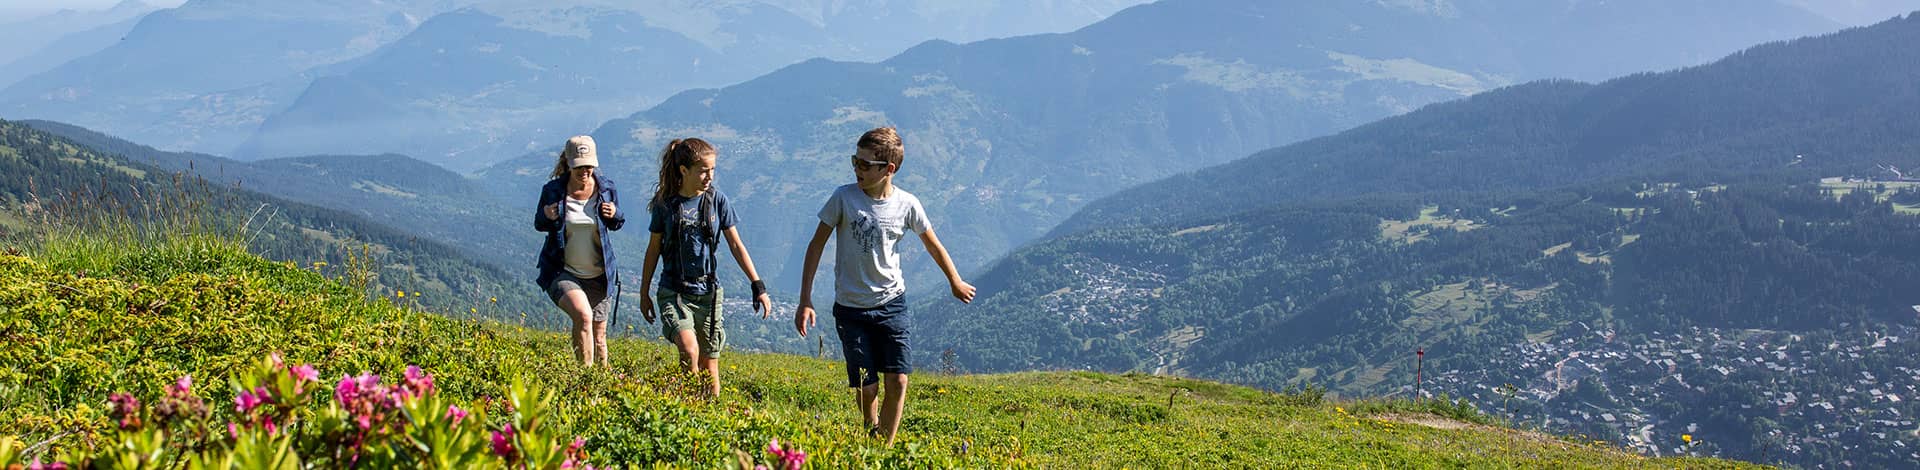 Hiking with friends or family in the French Alps in Les 3 Vallées